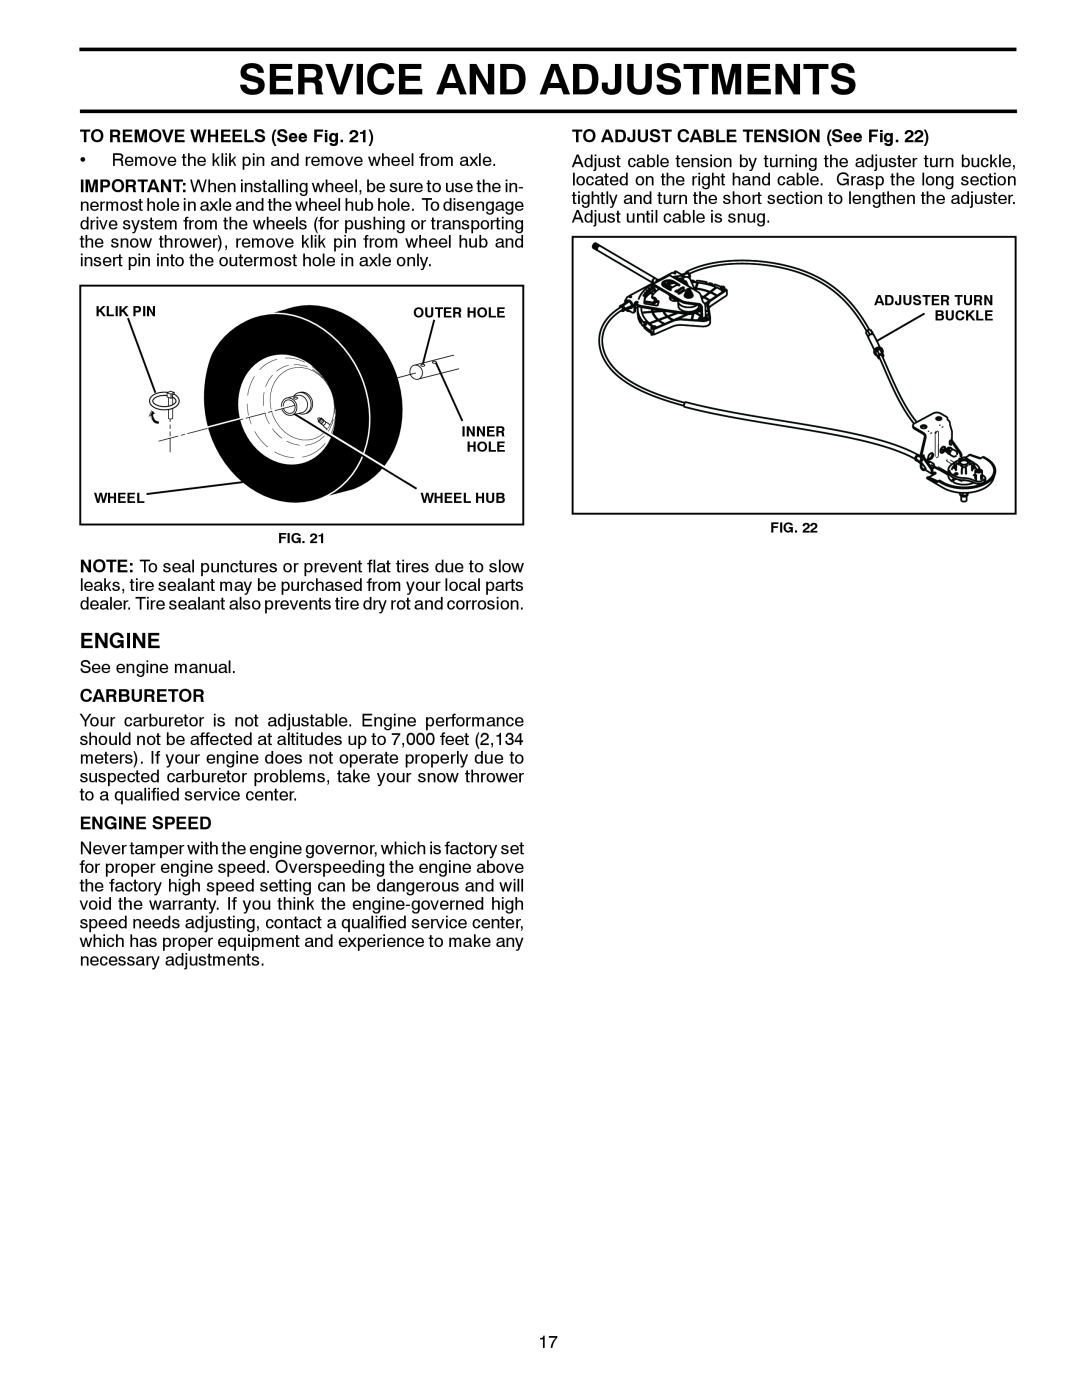 McCulloch MC627ES, 96192004100 owner manual Service And Adjustments, TO REMOVE WHEELS See Fig, Carburetor, Engine Speed 